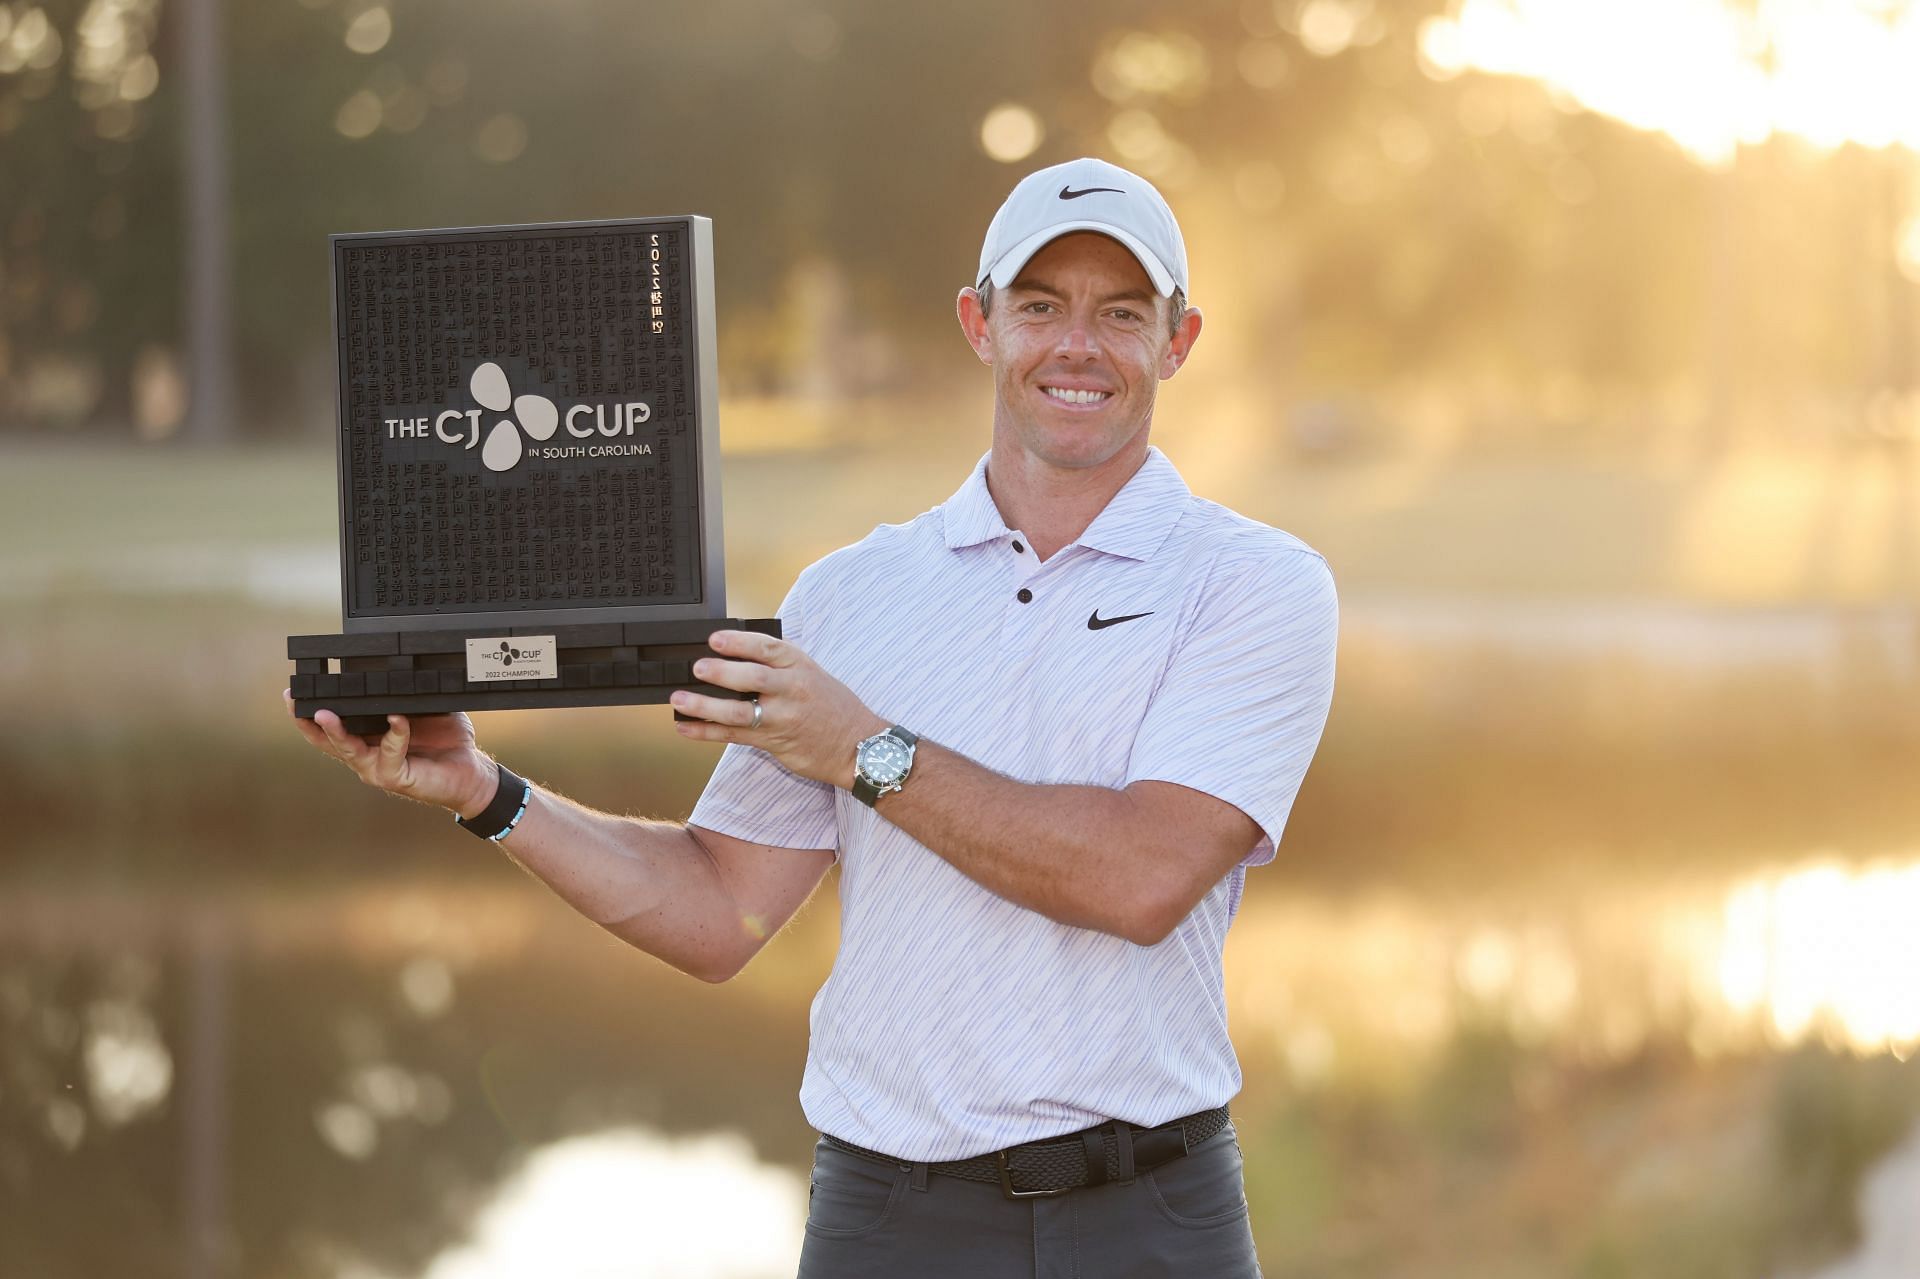 Rory McIlroy at The CJ Cup - Final Round (Image via Gregory Shamus/Getty Images)